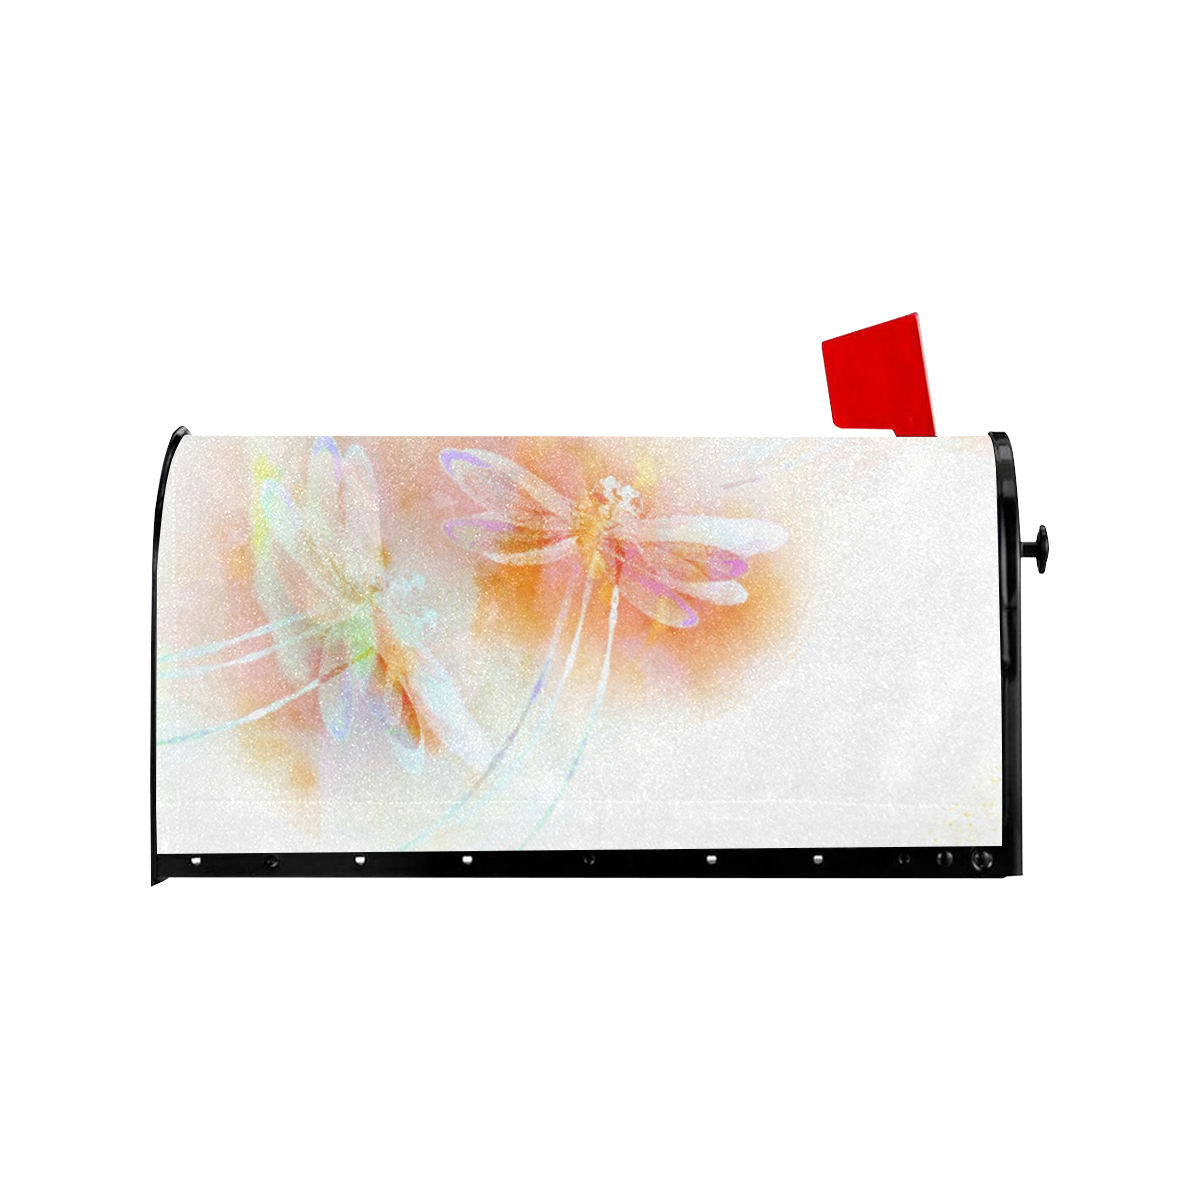 Watercolor dragonflies Mailbox Cover